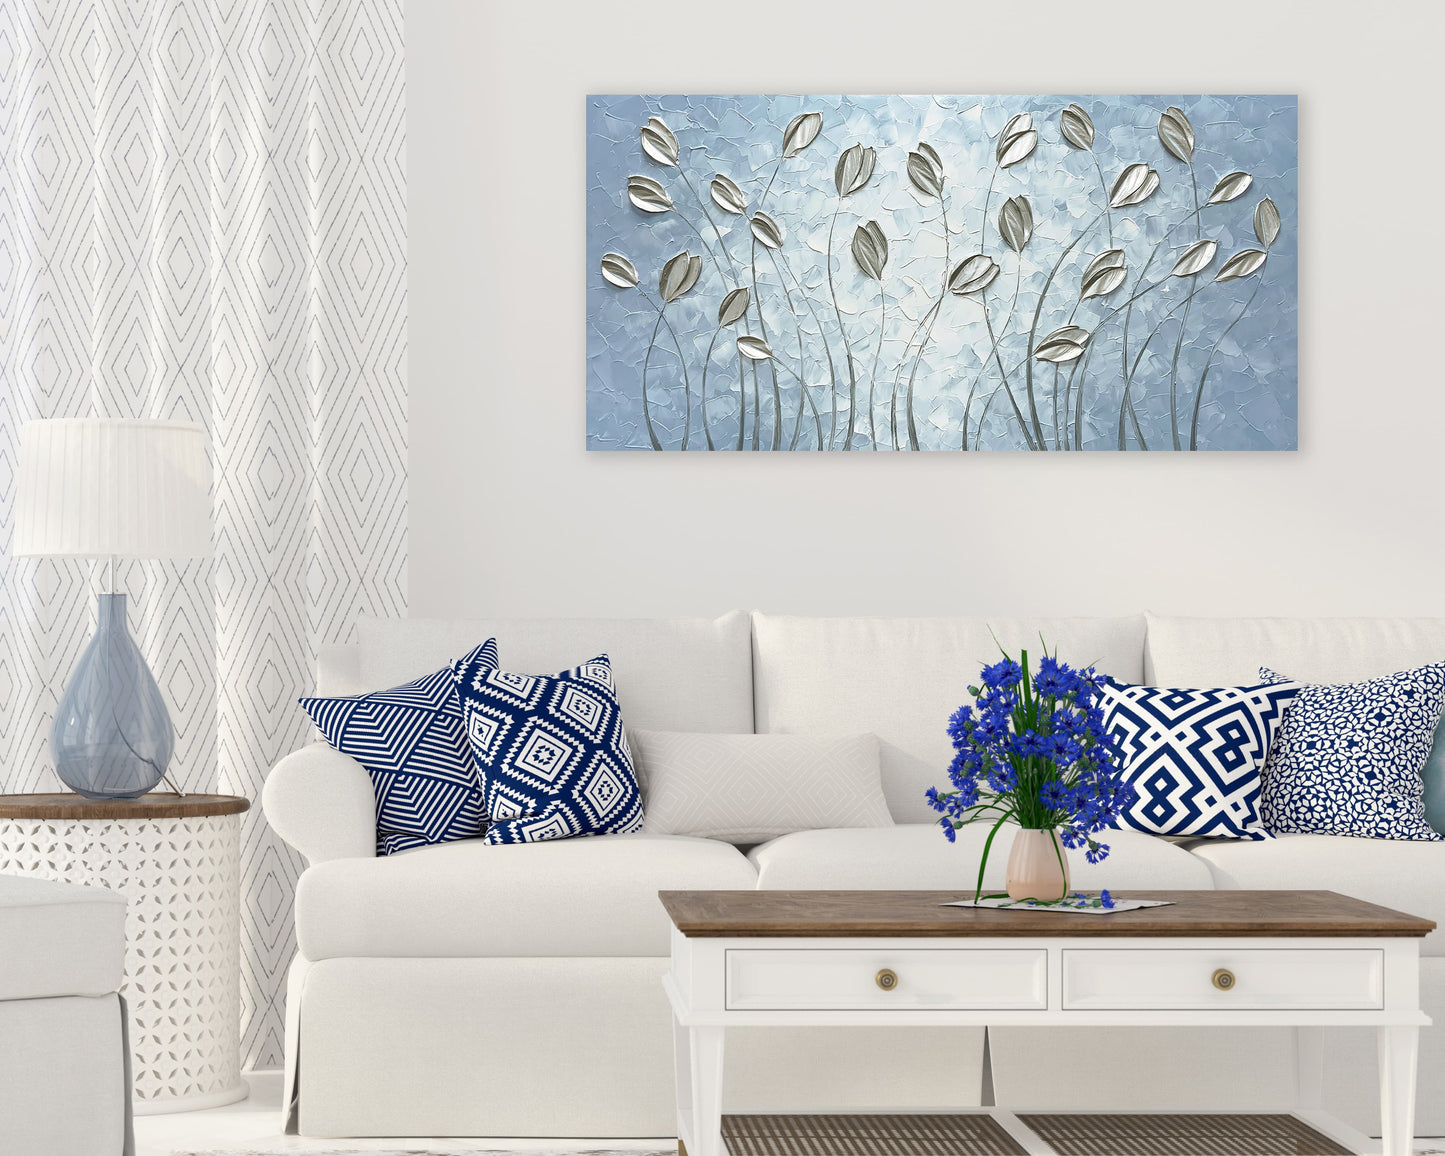 Hand-painted modern art "Silver Serenity" Wrapped Canvas Wall Art for Home Decor